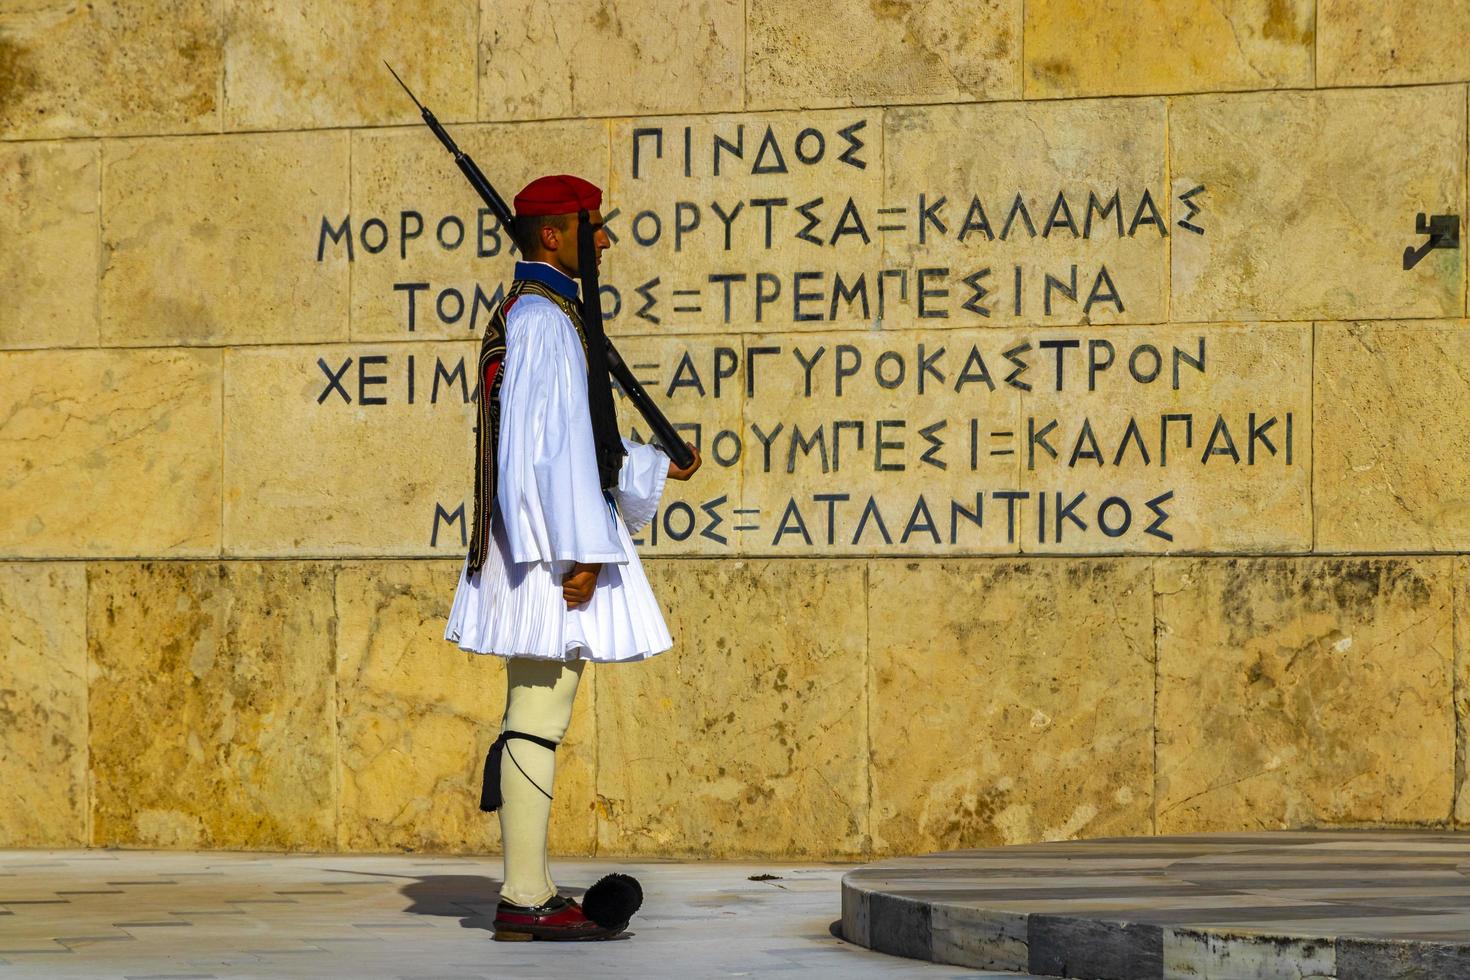 Athens Attica Greece 2018 Monument Tomb of the Unknown Soldier on Syntagma Square Parliament Building parade Athens Greece. photo